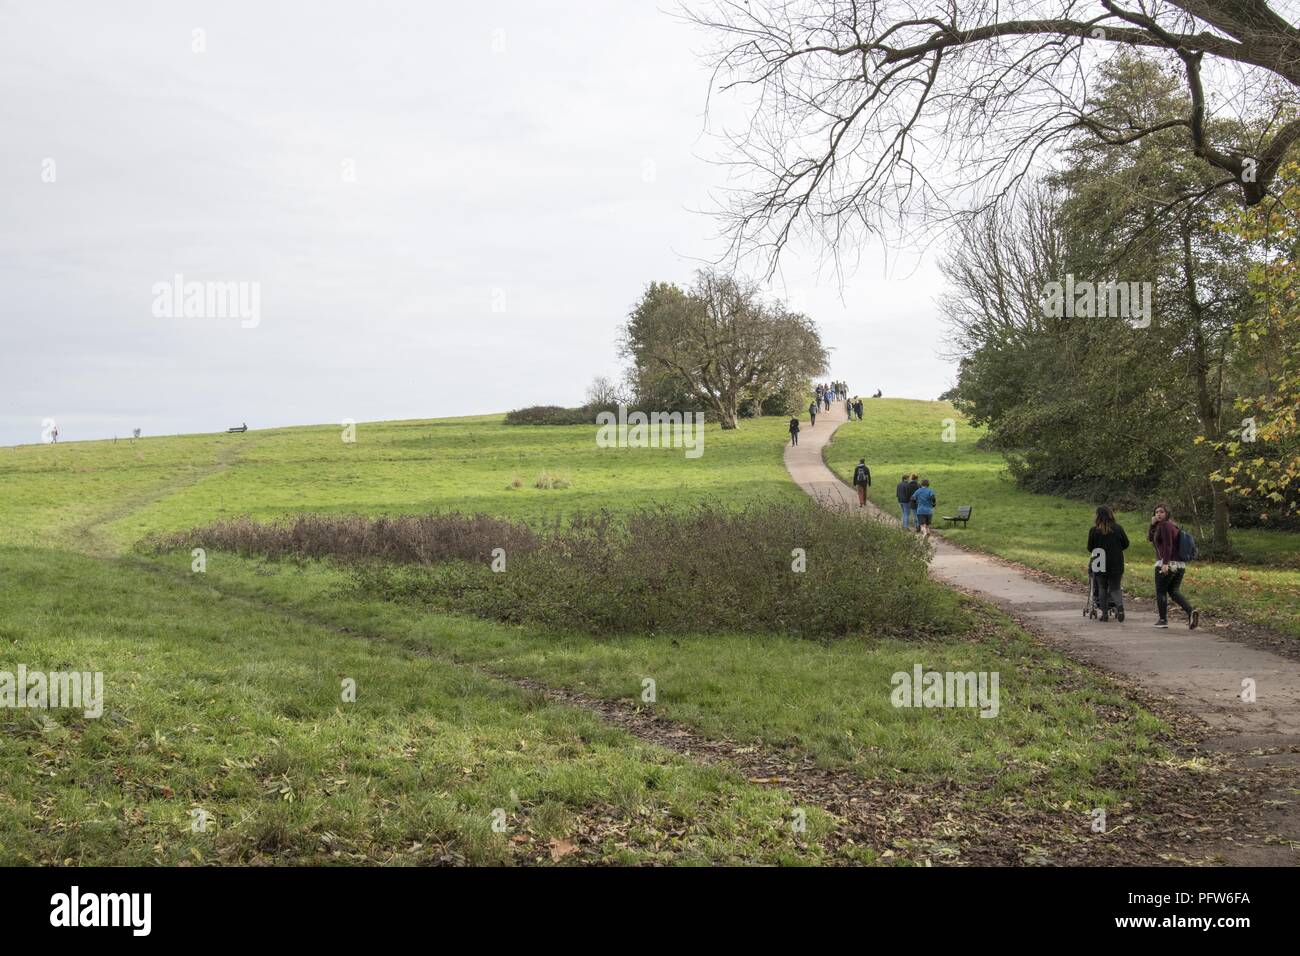 Landscape view, showing pedestrians walking up a paved path, surmounting a grassy hill, with trees at right and in the background, located on Hampstead Heath, a 790-acre public access park in central London, England, October 28, 2017. () Stock Photo